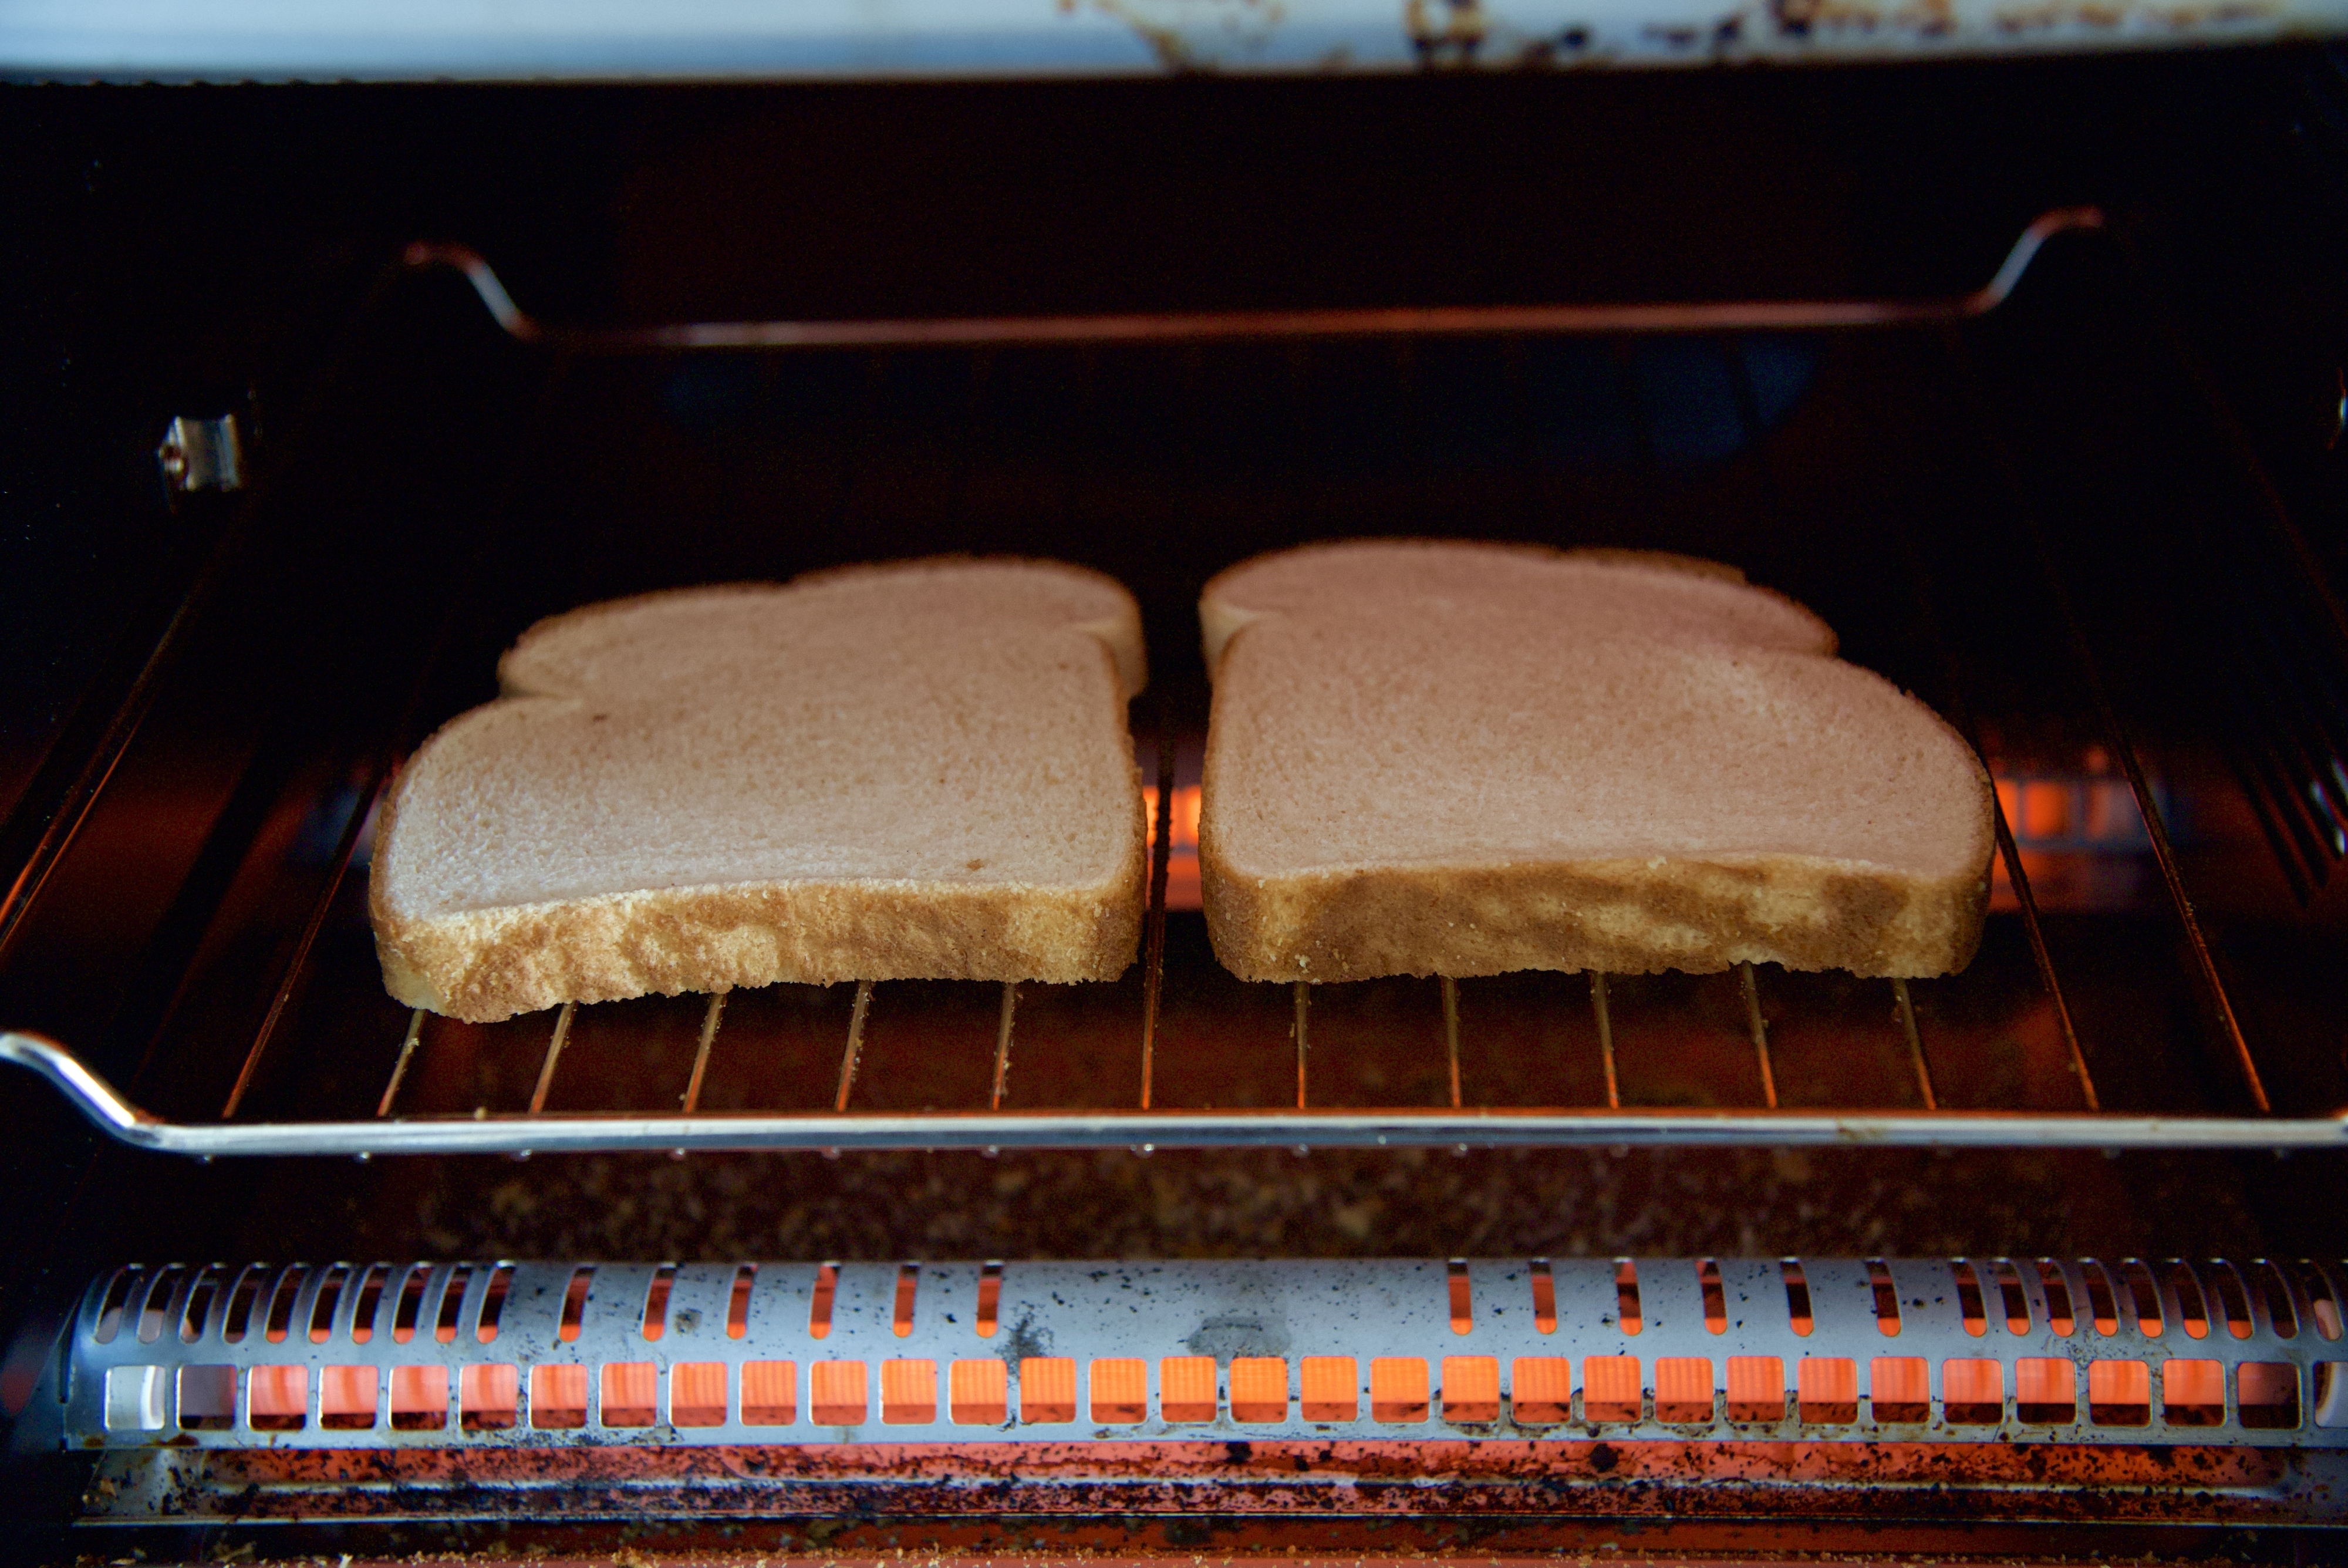 Two slices of bread toasting in an open toaster oven